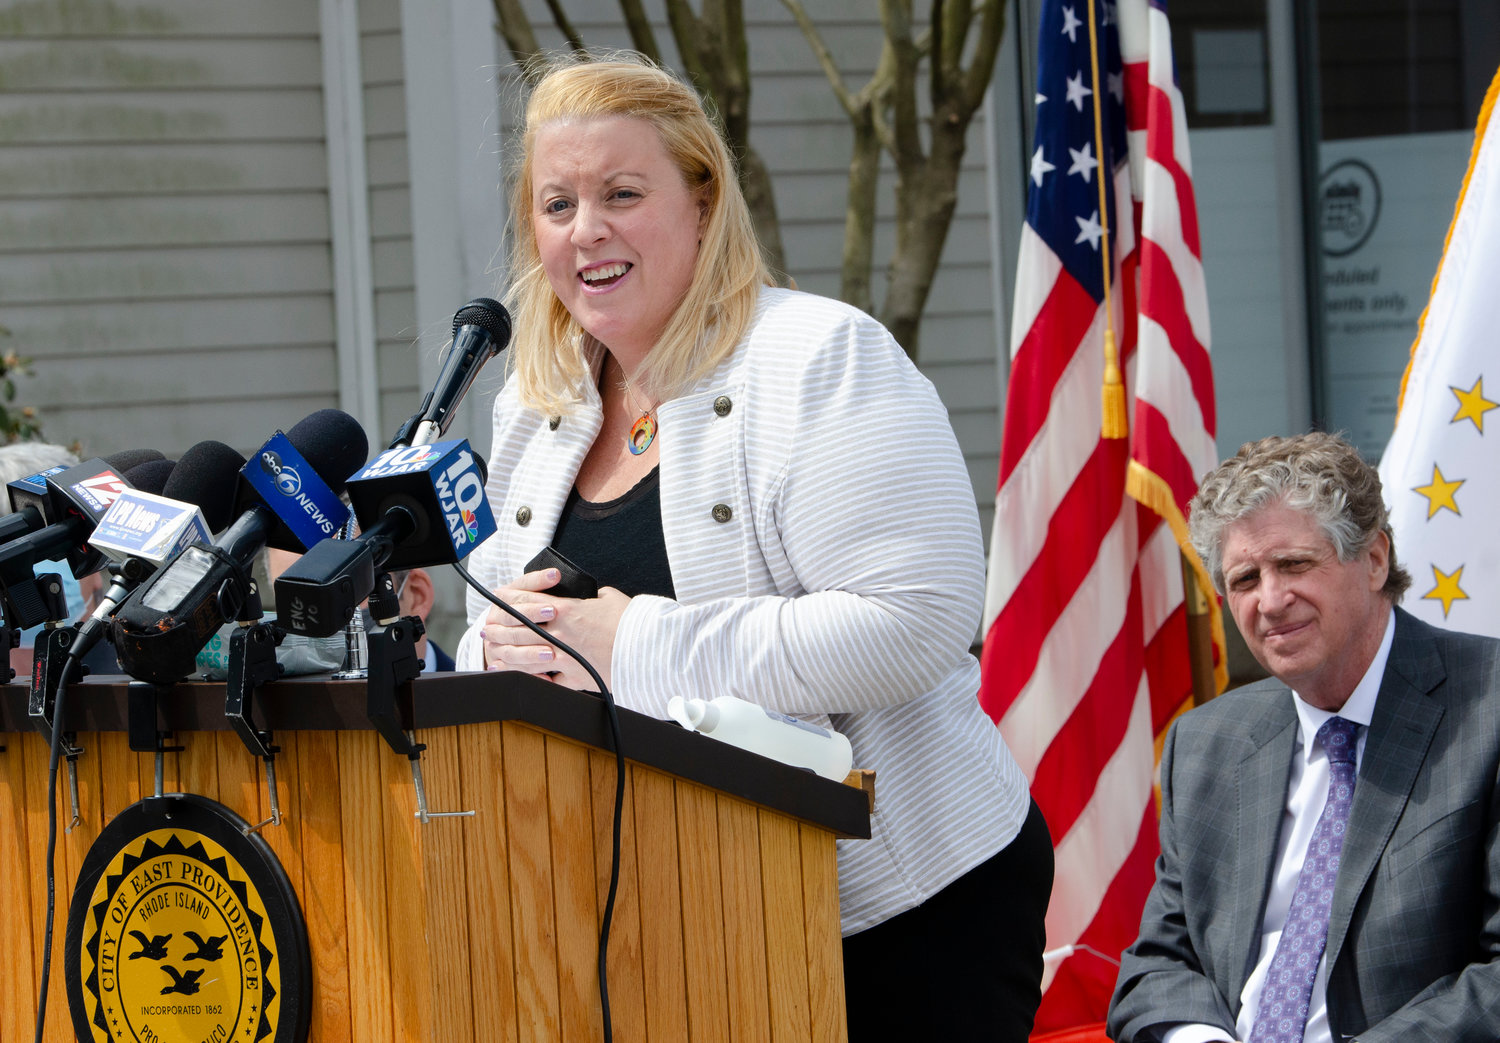 Warren Town Manager Kate Michaud speaks during a brief announcement naming East Providence one of three newly created regional COVID-19 vaccination pods, which will serve residents of most East Bay communities over the next few months. The ceremony took place at the East Providence Senior Center and included Governor Daniel McKee, and other East Bay town officials.